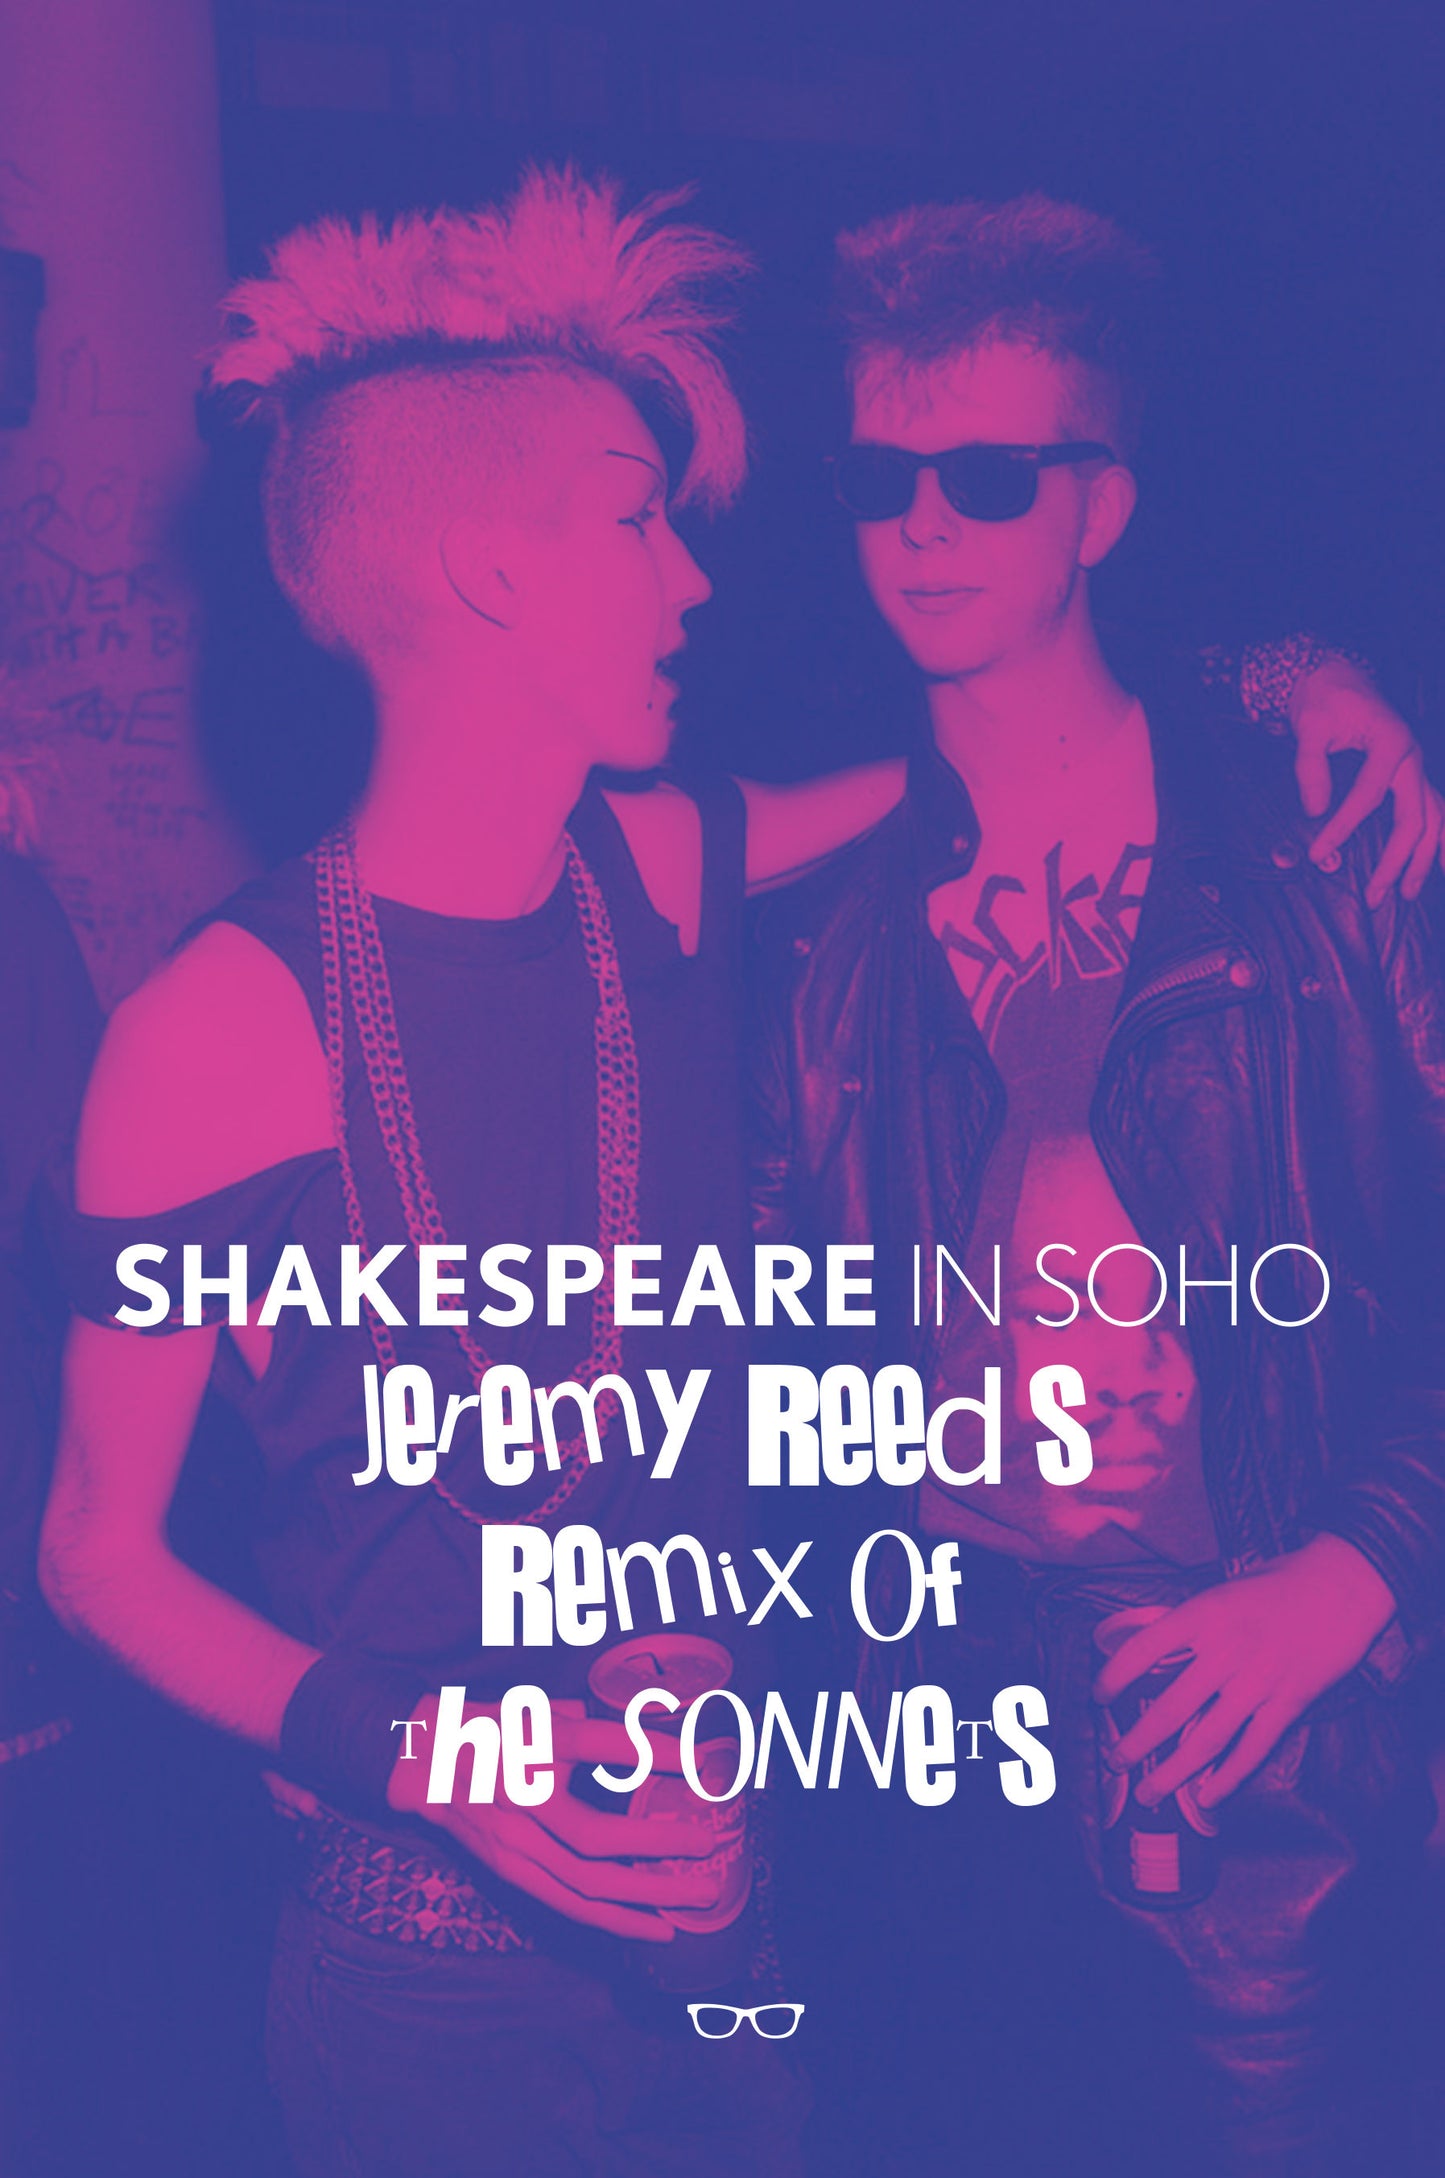 Shakespeare In Soho: Jeremy Reed's Remix of the Sonnets